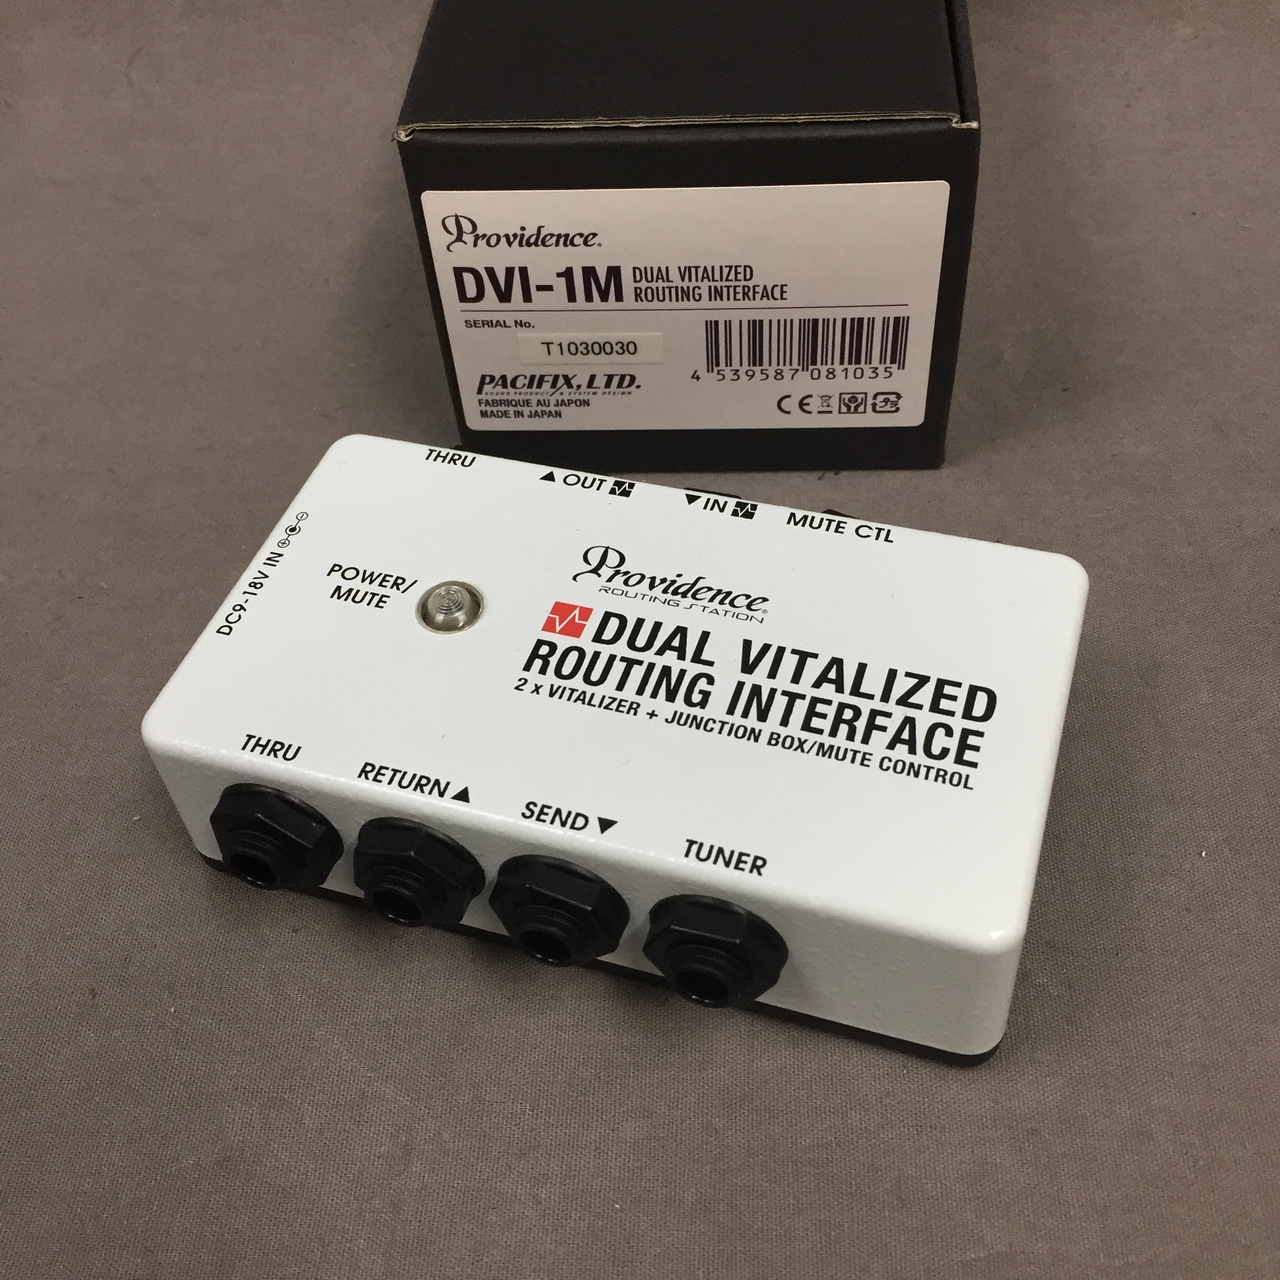 Providence DUAL VITALIZED ROUTING INTERFACE DVI-1M（中古）【楽器 